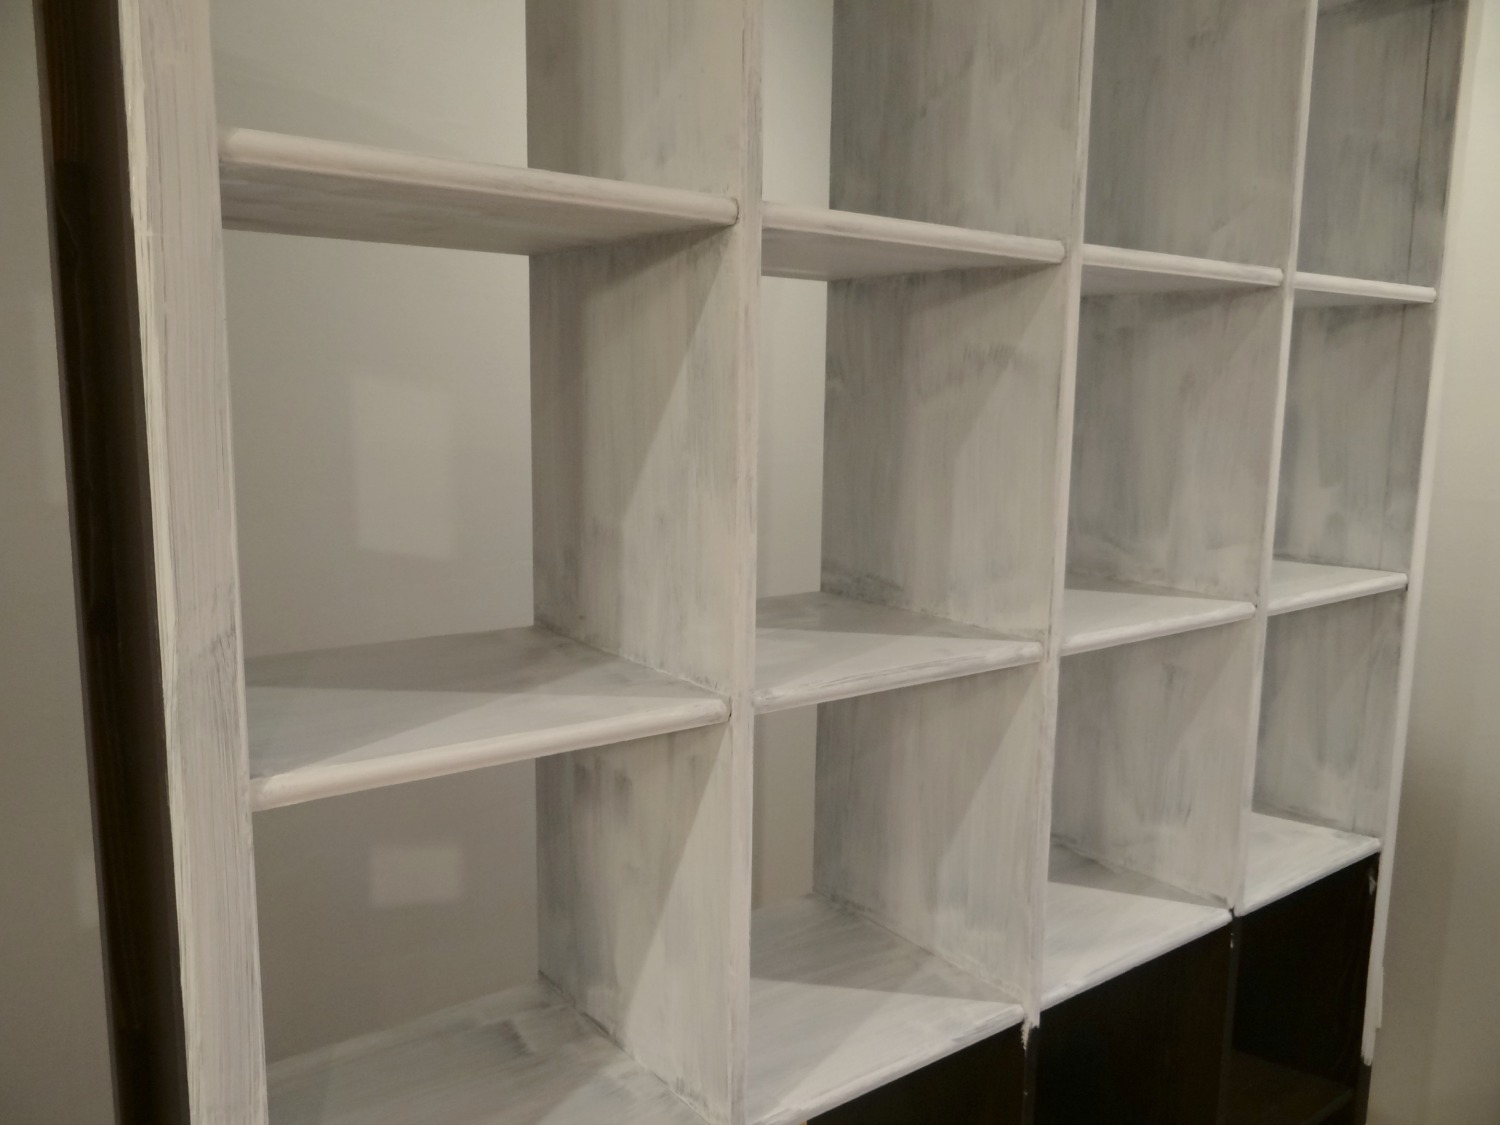 Repainting bookcase with chalk paint